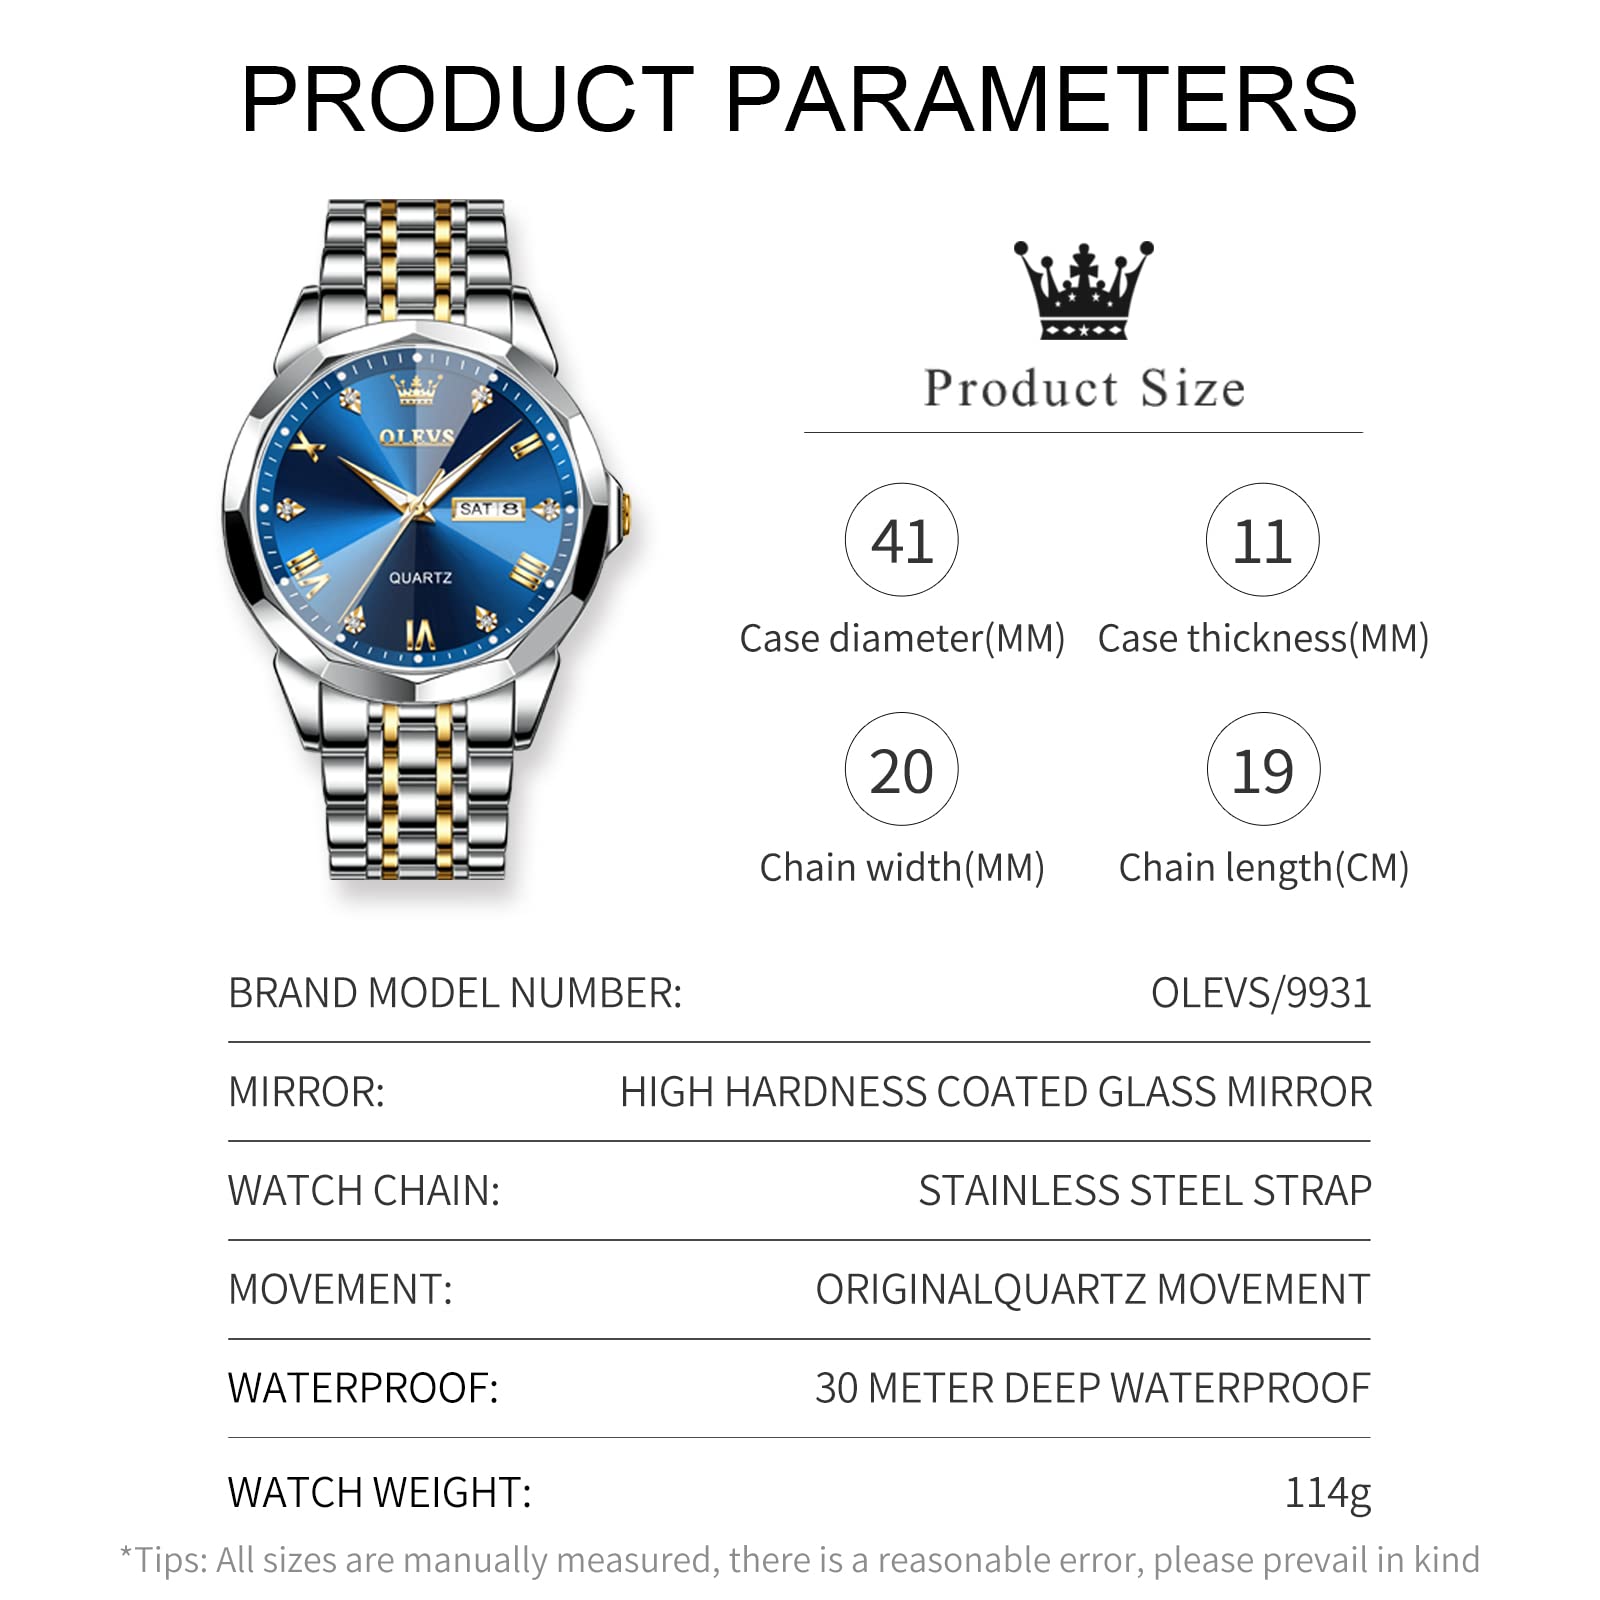 OLEVS Watches for Men Stainless Steel Analog Quartz Waterproof Luminous Luxury Dress Date Diamond Business Casual Mens Wrist Watch（Gold/Blue/Black/White Dial）